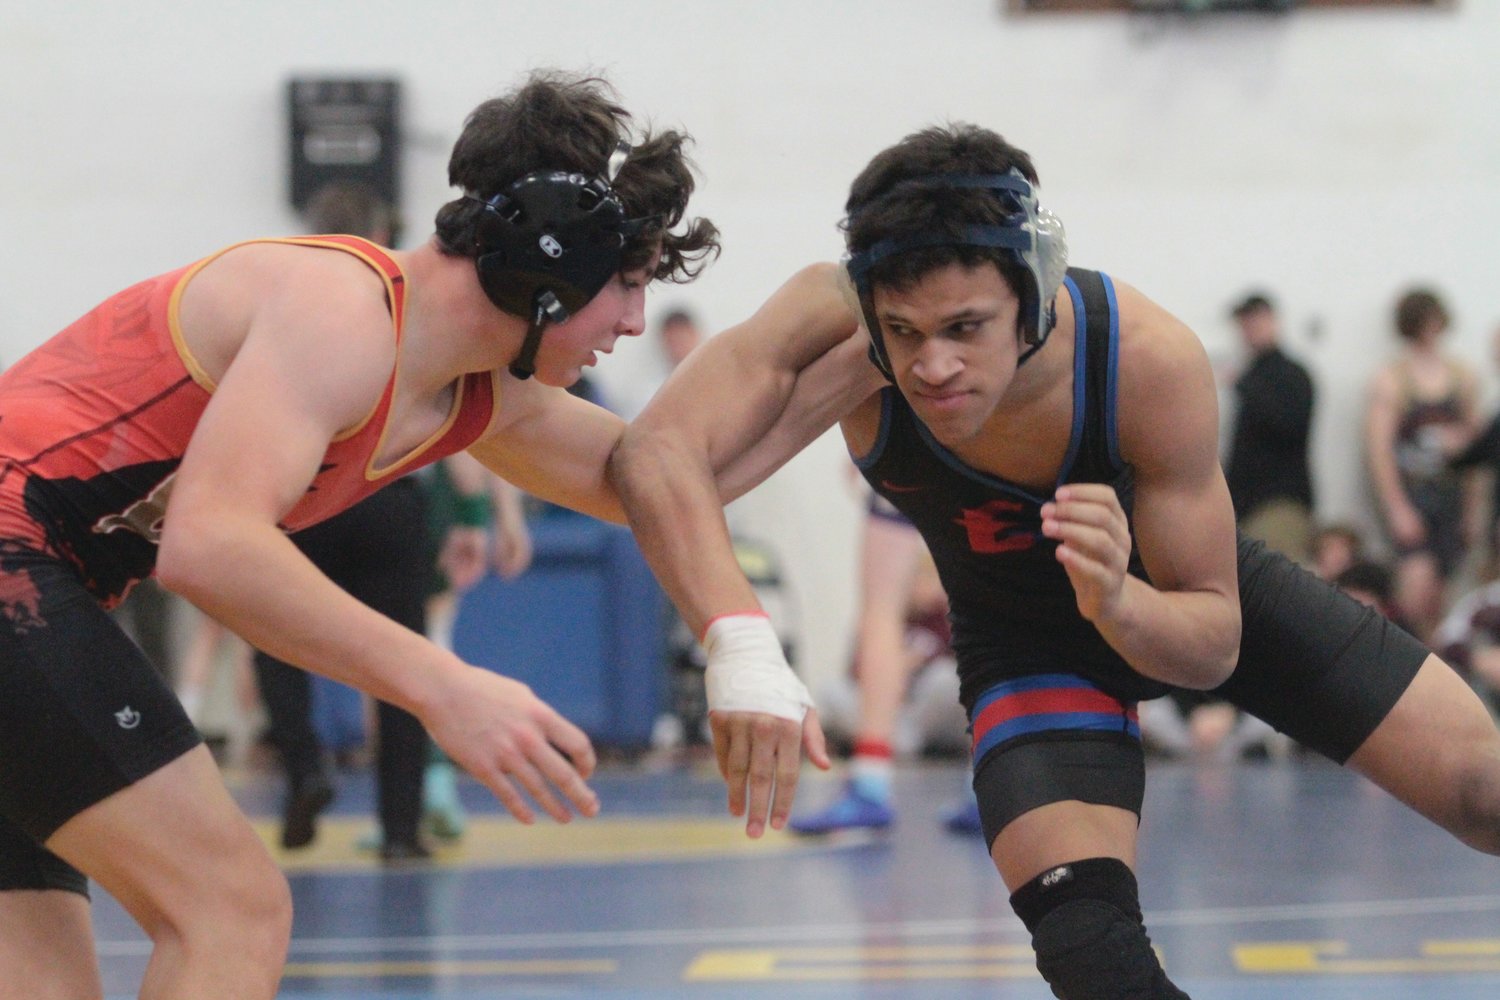 Rivals freshman Manaseh Lanphear Ramirez grapples with his opponent on Saturday. Lanphear Ramirez went 3-2 overall in the Bainbridge-based tourney to earn fourth place in the 145-pound weight class.